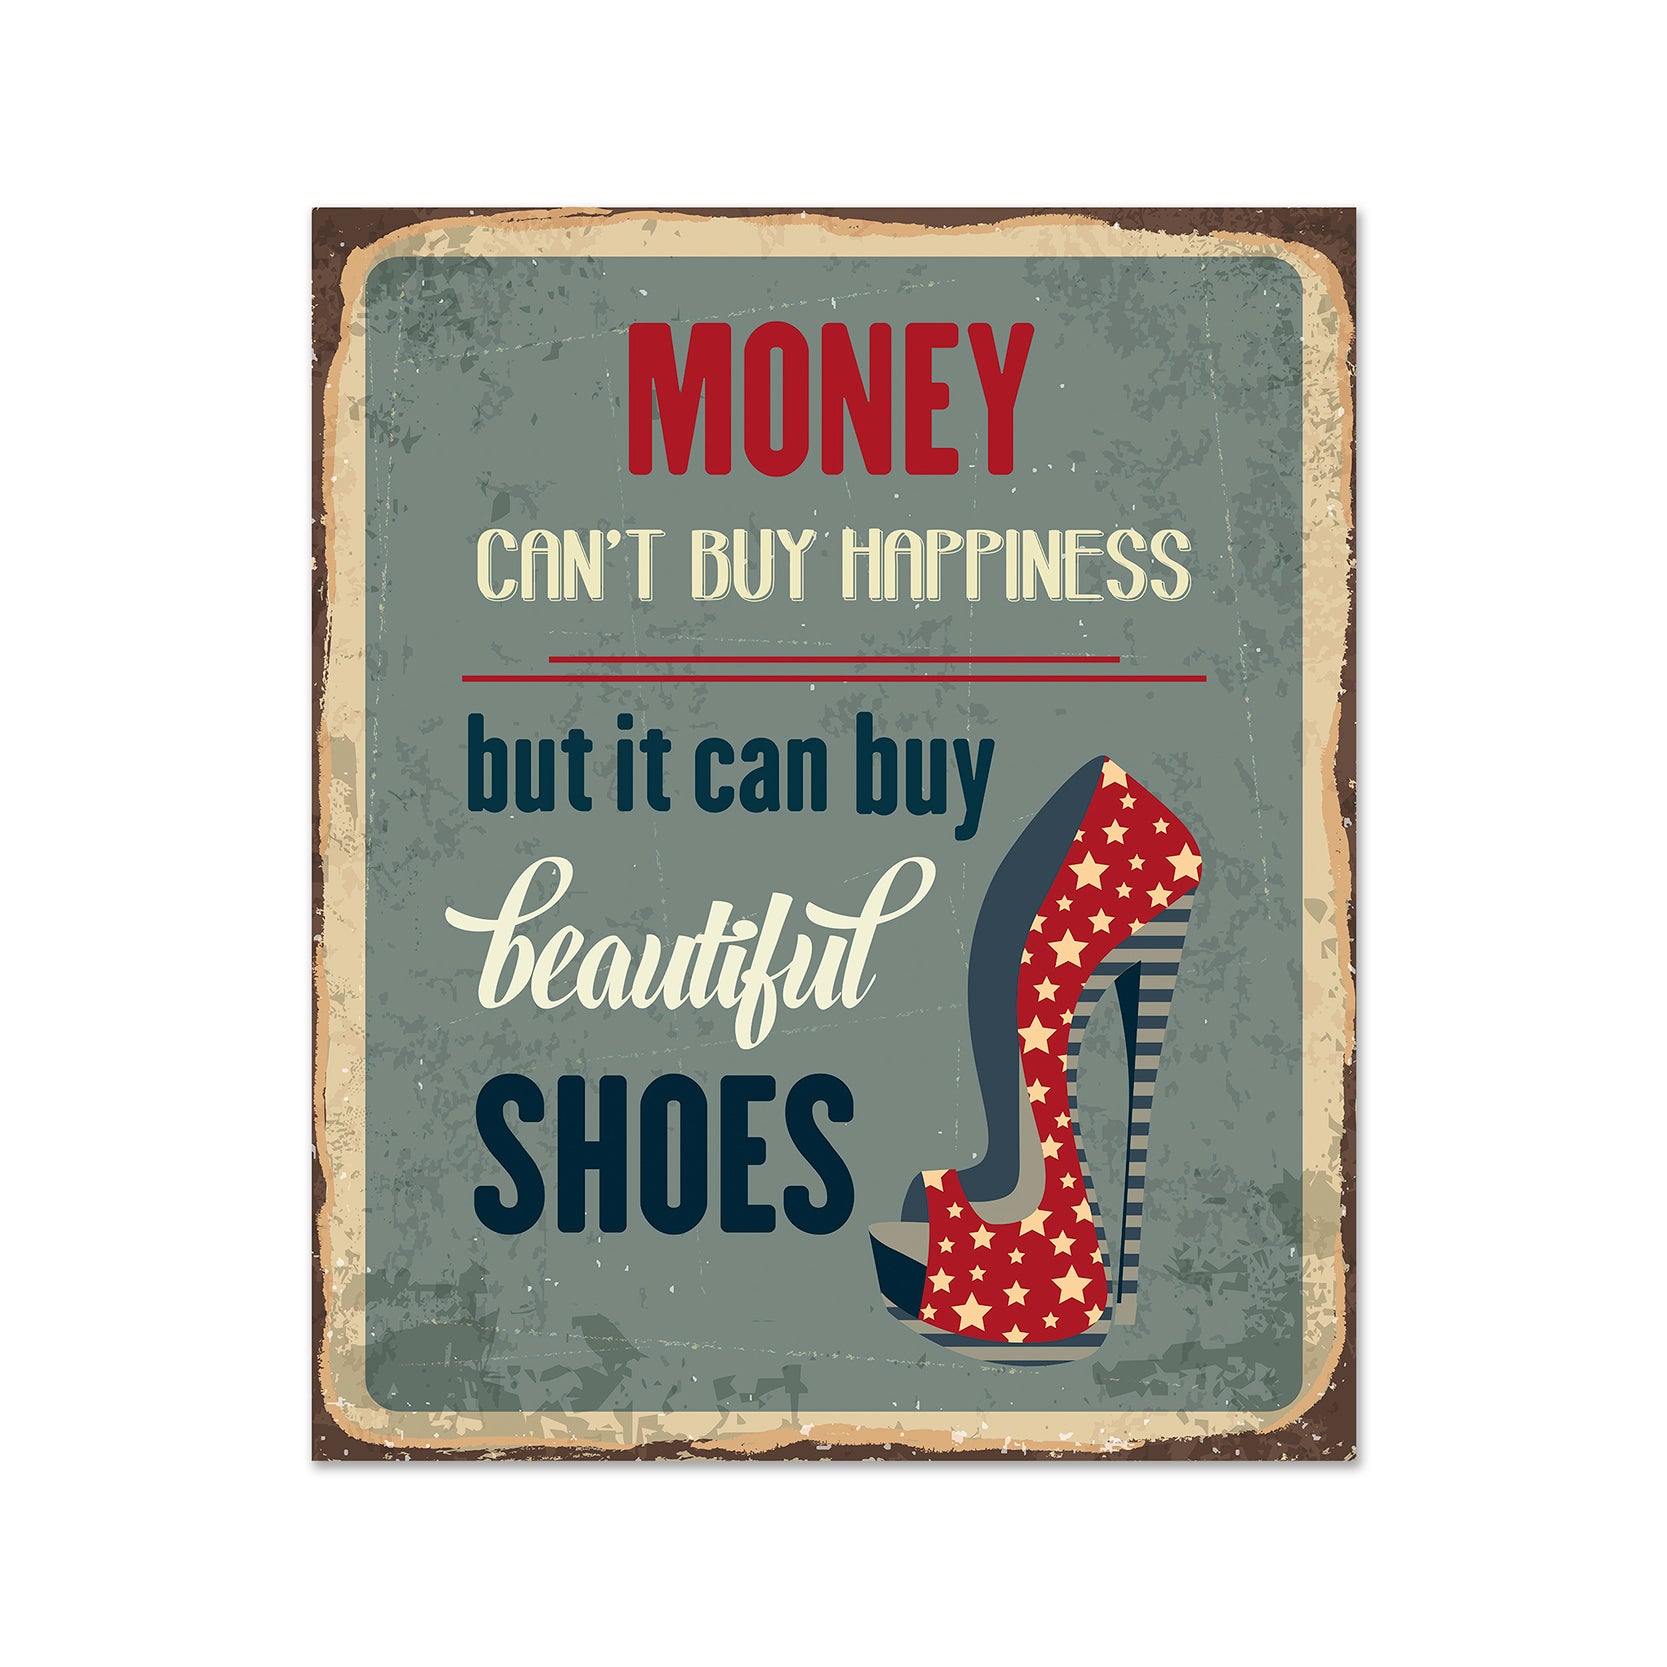 Money Cant Buy Happiness but it can Buy Beautiful Shoes Wooden Fridge / Refrigerator Magnet